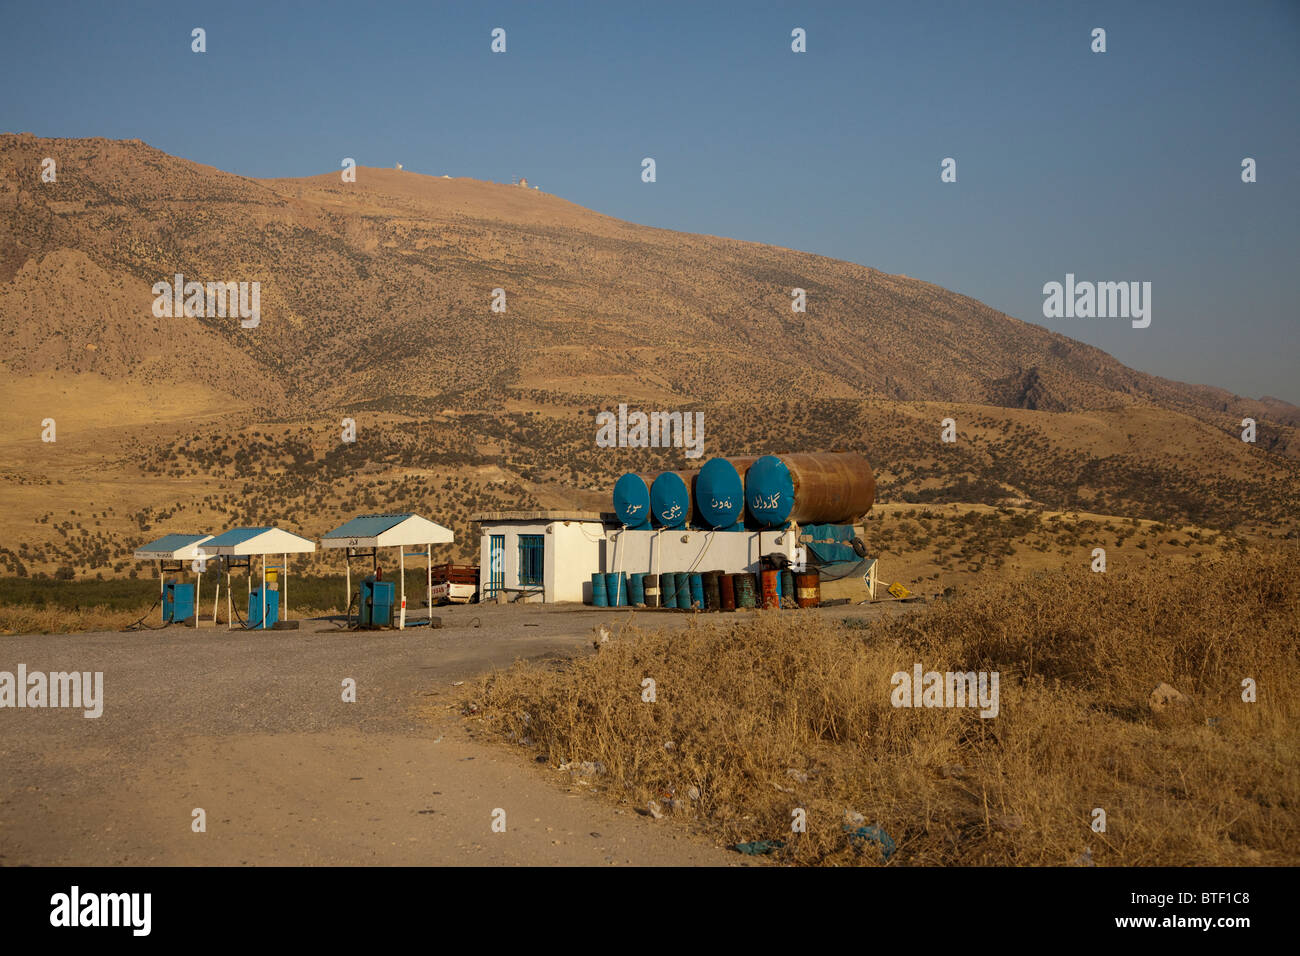 A small private filling station in Kurdistan region Northern Iraq. In KRI the fuel from internal national refineries provenience does not cover 100% of fuel consumption needs. Privately owned gas stations are authorized to import fuel and sell at a higher price compared to government owned gas stations. Stock Photo